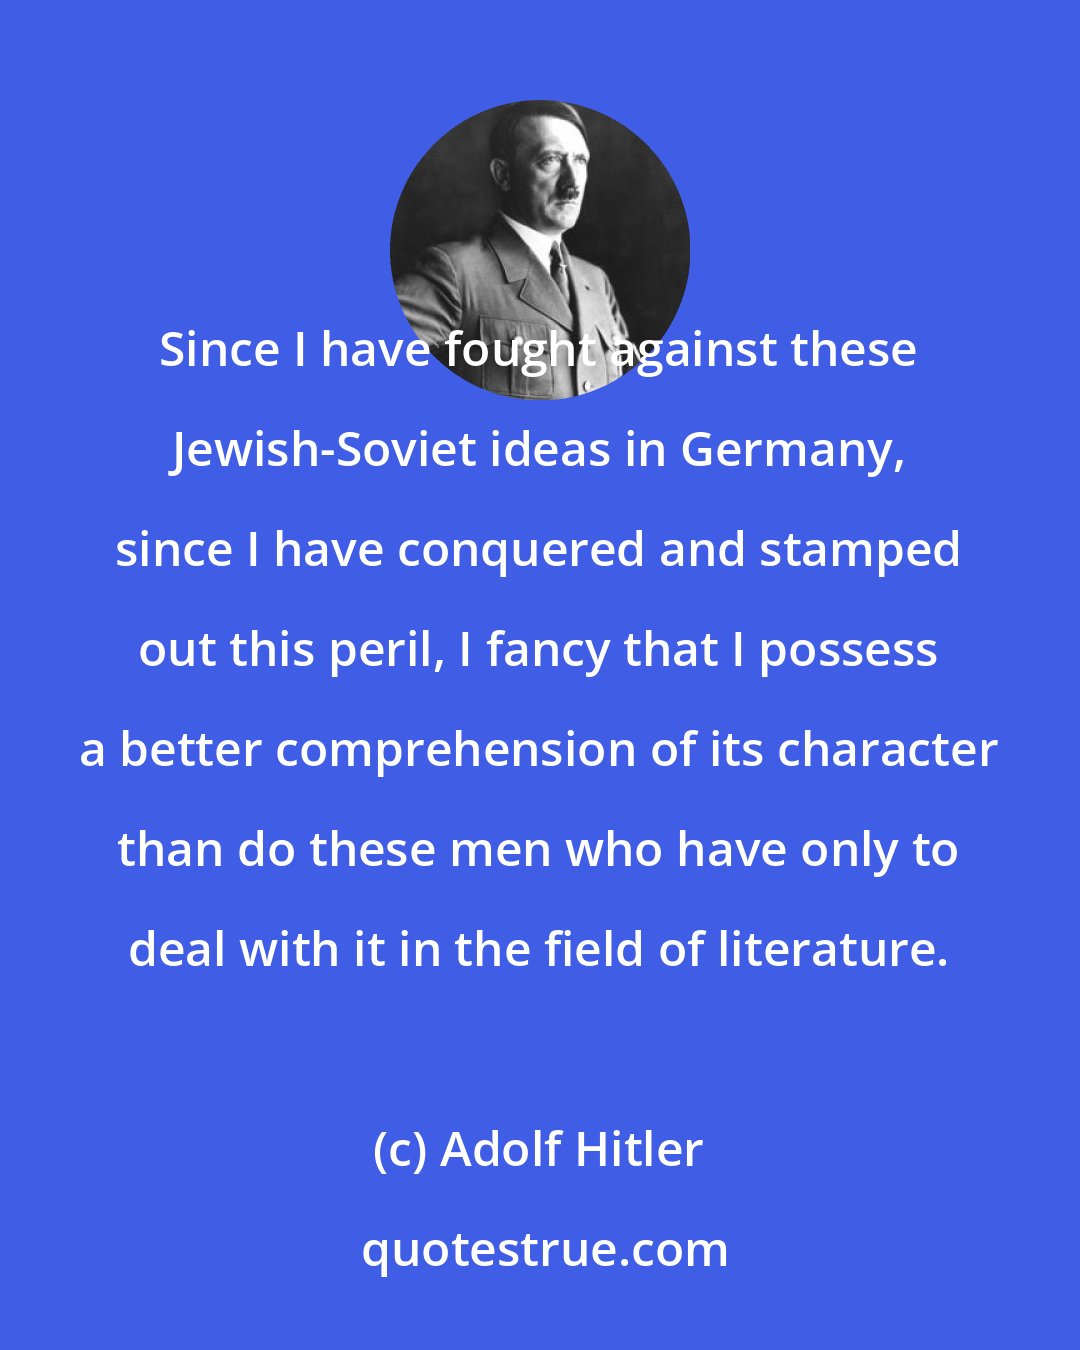 Adolf Hitler: Since I have fought against these Jewish-Soviet ideas in Germany, since I have conquered and stamped out this peril, I fancy that I possess a better comprehension of its character than do these men who have only to deal with it in the field of literature.